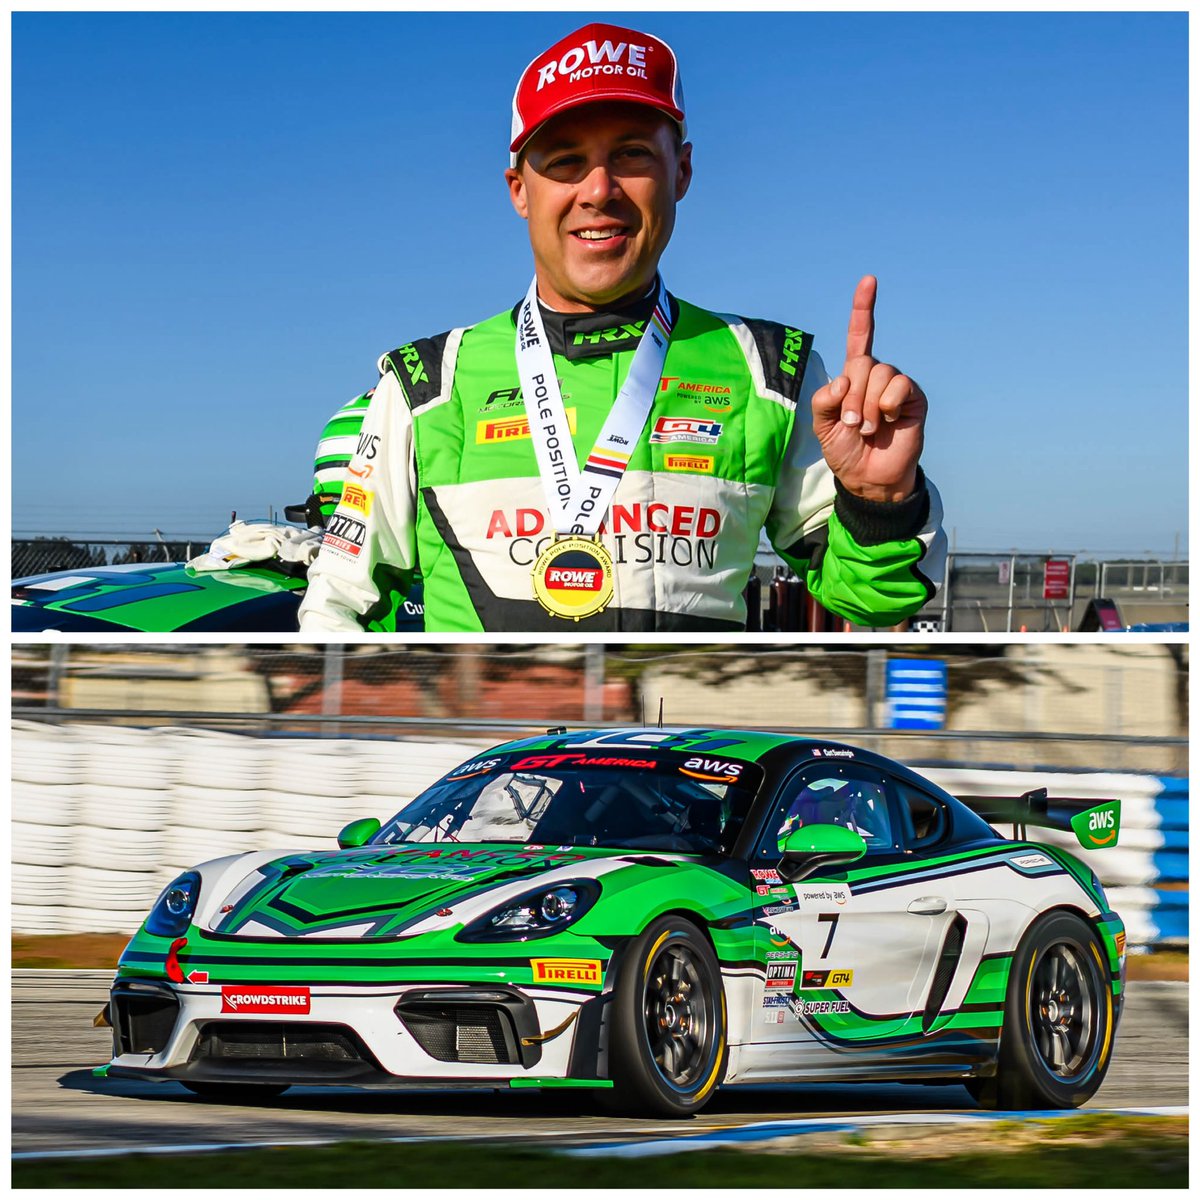 🏁 Pole position for Curt Swearingin in @gt_america_ in GT4 for ACI Motorsports. 👍 Well done! ⏱️ Full results: drive.google.com/file/d/10sjF60… - #Porsche | #GTAmerica | #GTSebring